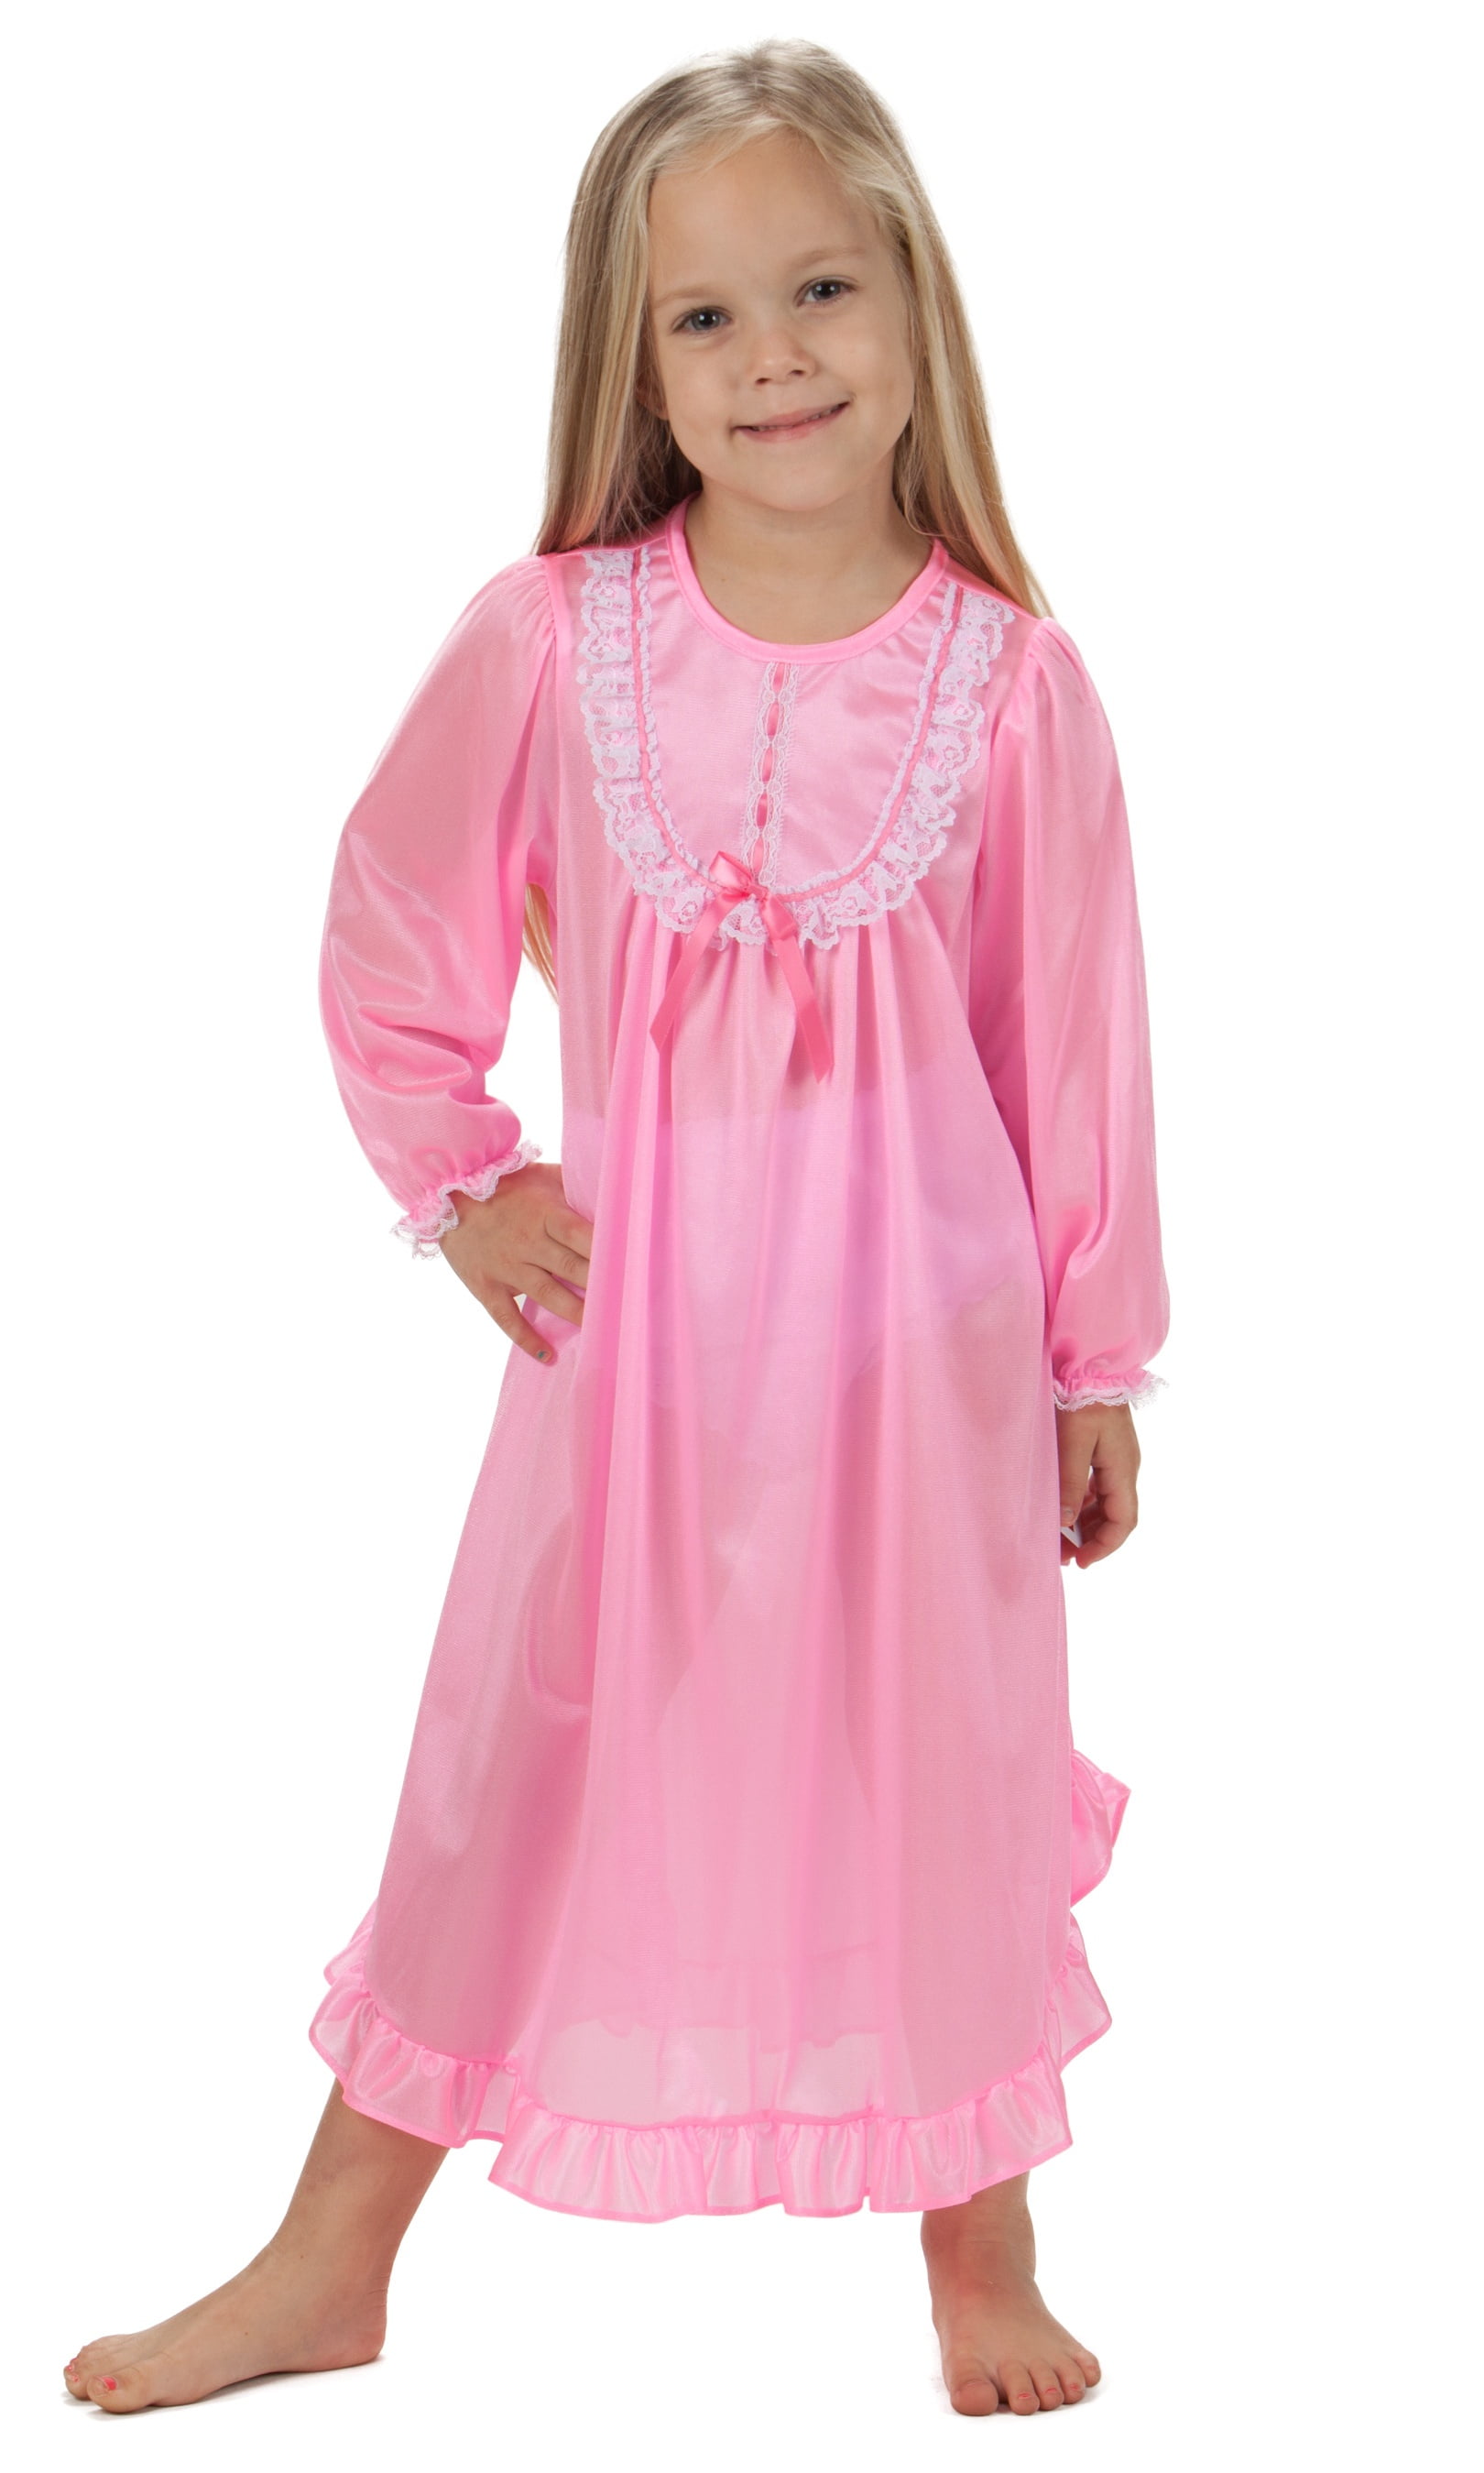 Solid Colors Long Sleeve Traditional Nightgown for Girls, 4 - 14 ...